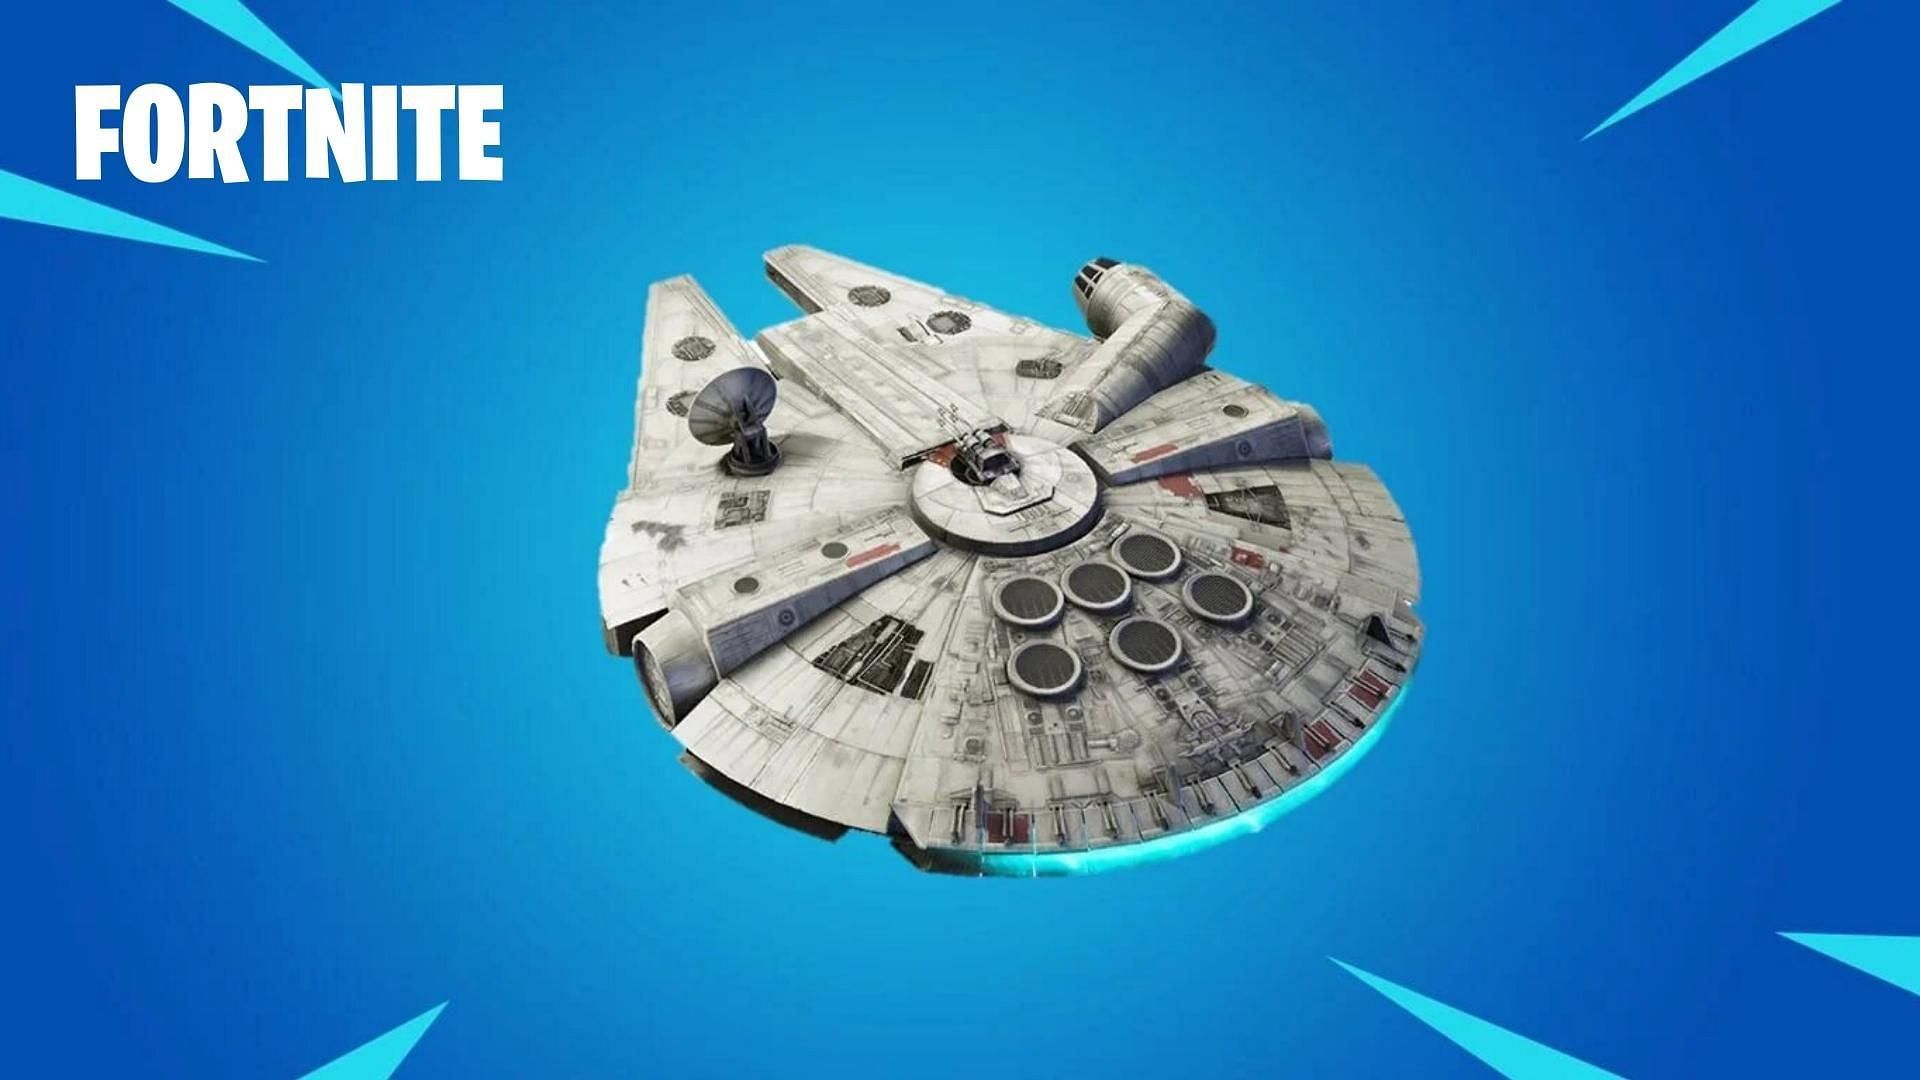 Star Wars Millennium Falcon glider is one of the rarest free Fortnite cosmetics in-game (Image via Epic Games)